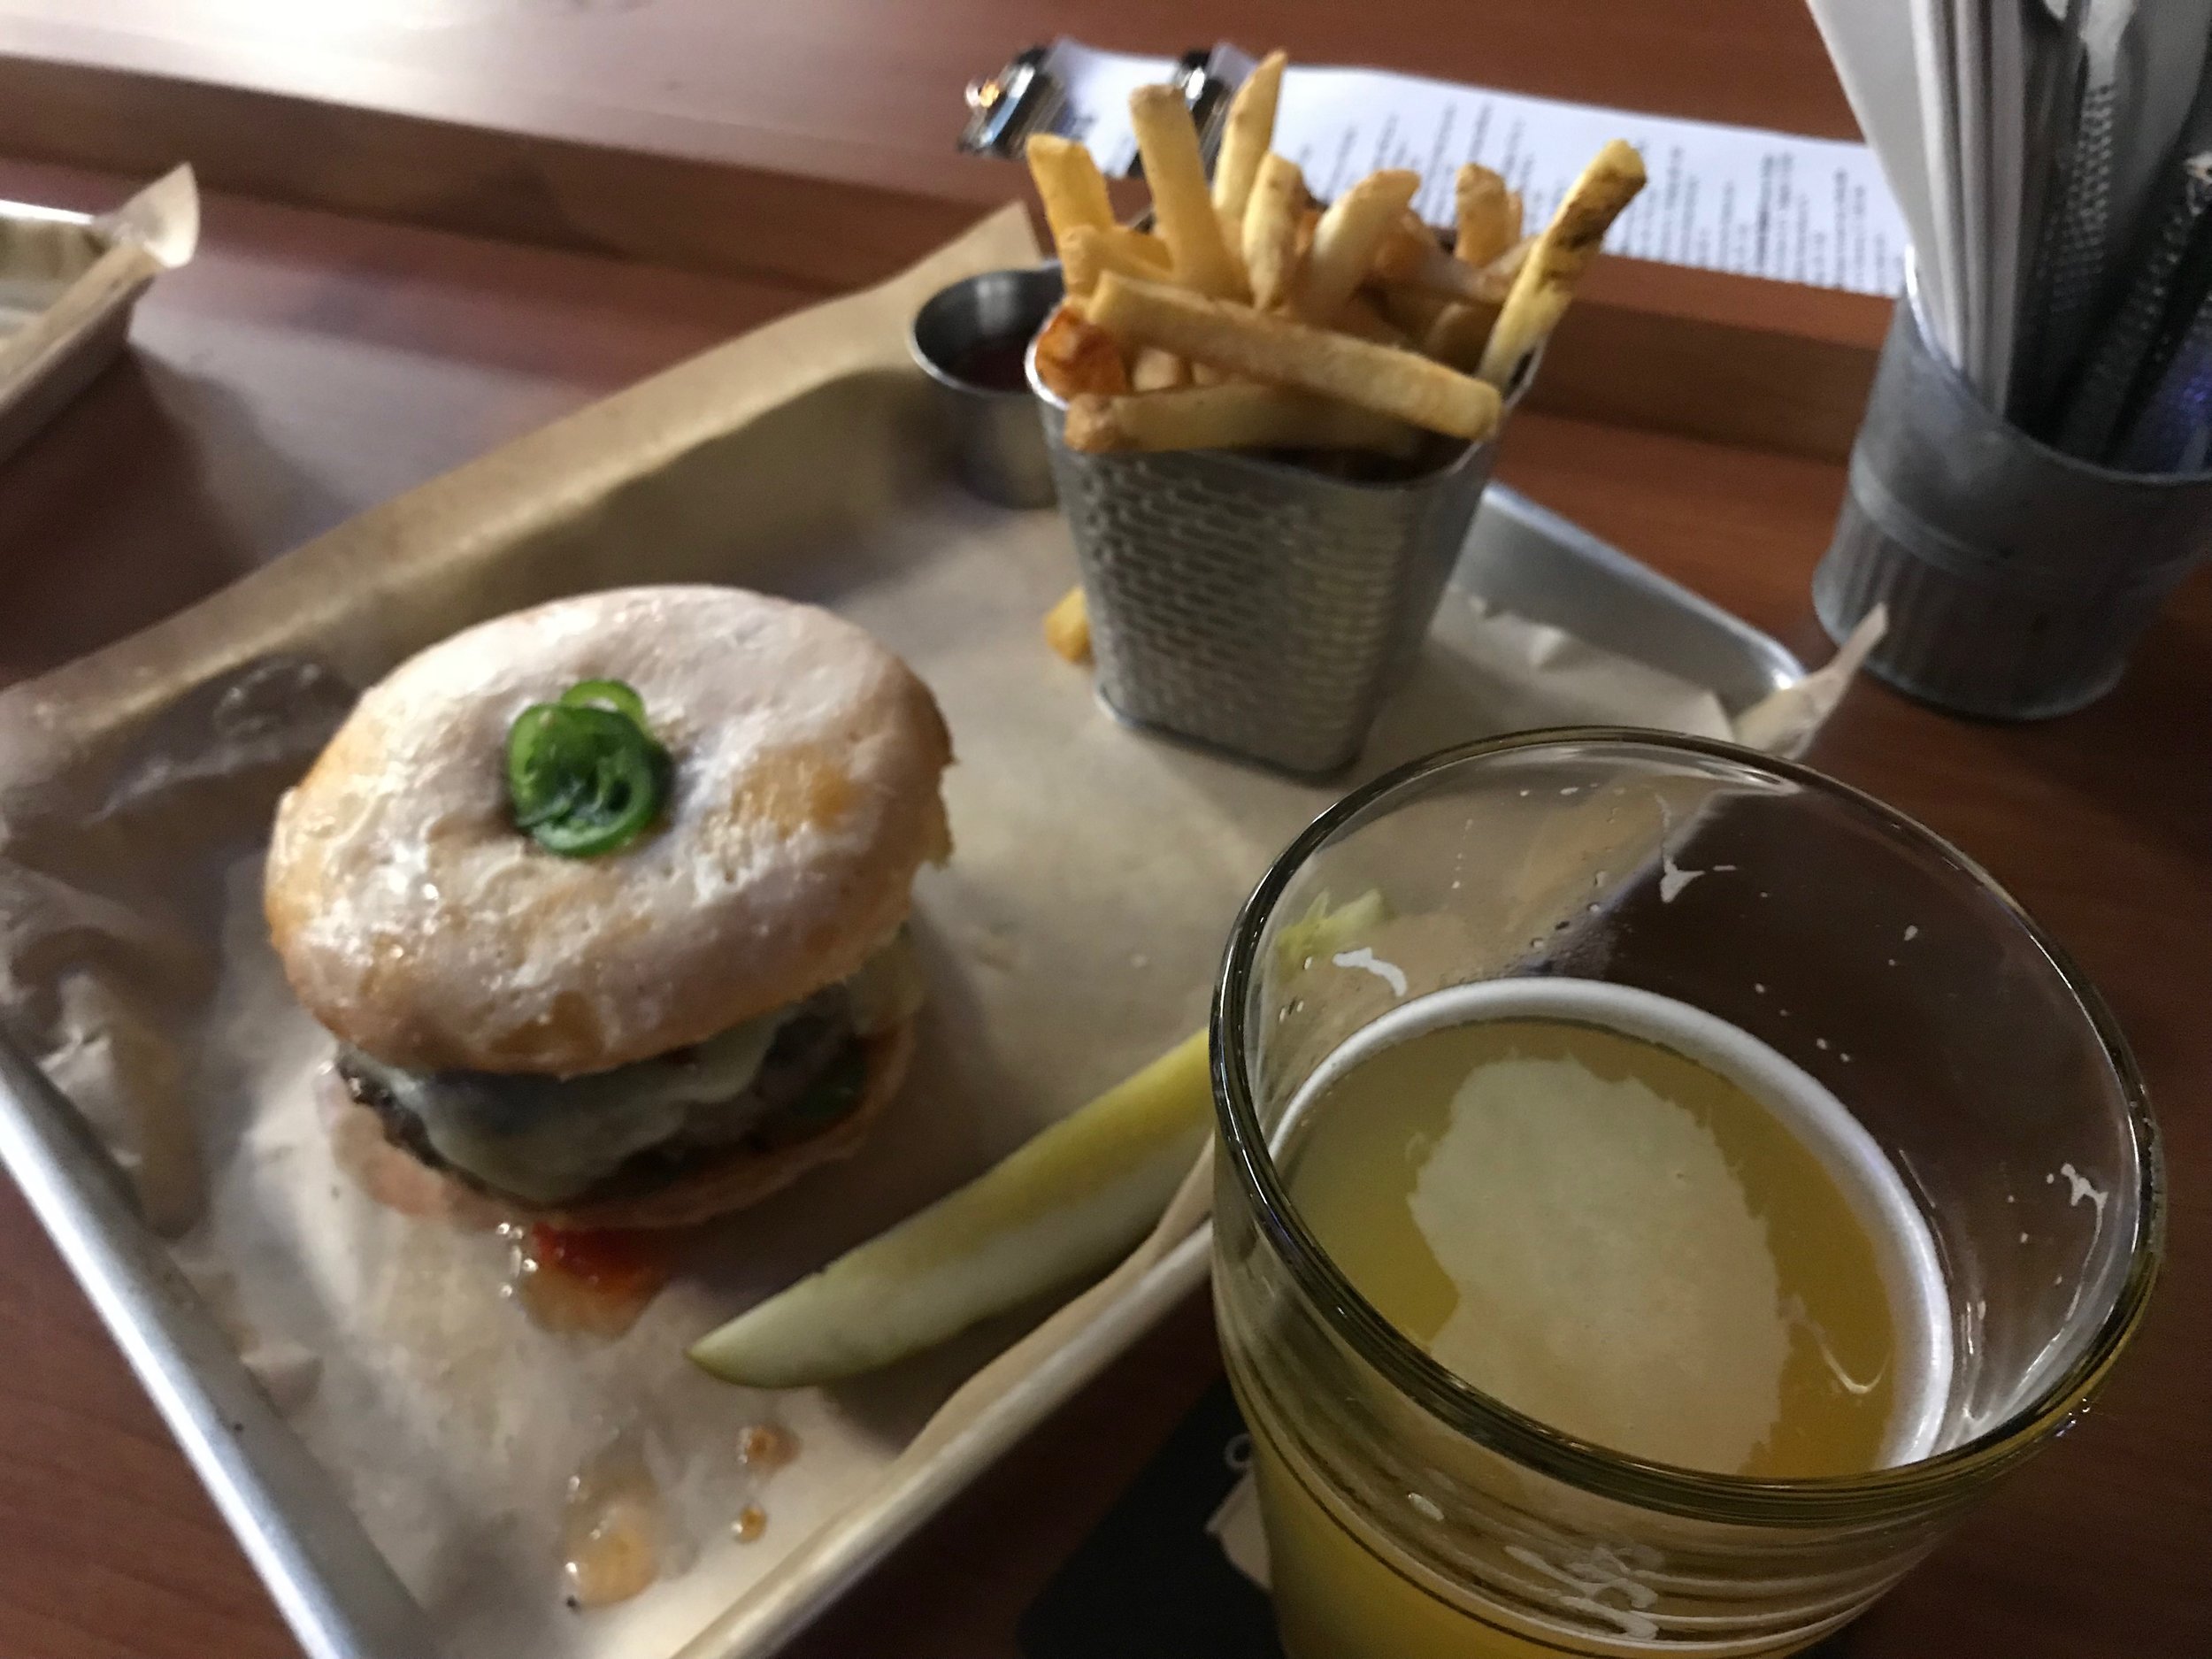  Best things to do in Southern Maine - Donut Burger at Garden Street Bowl 